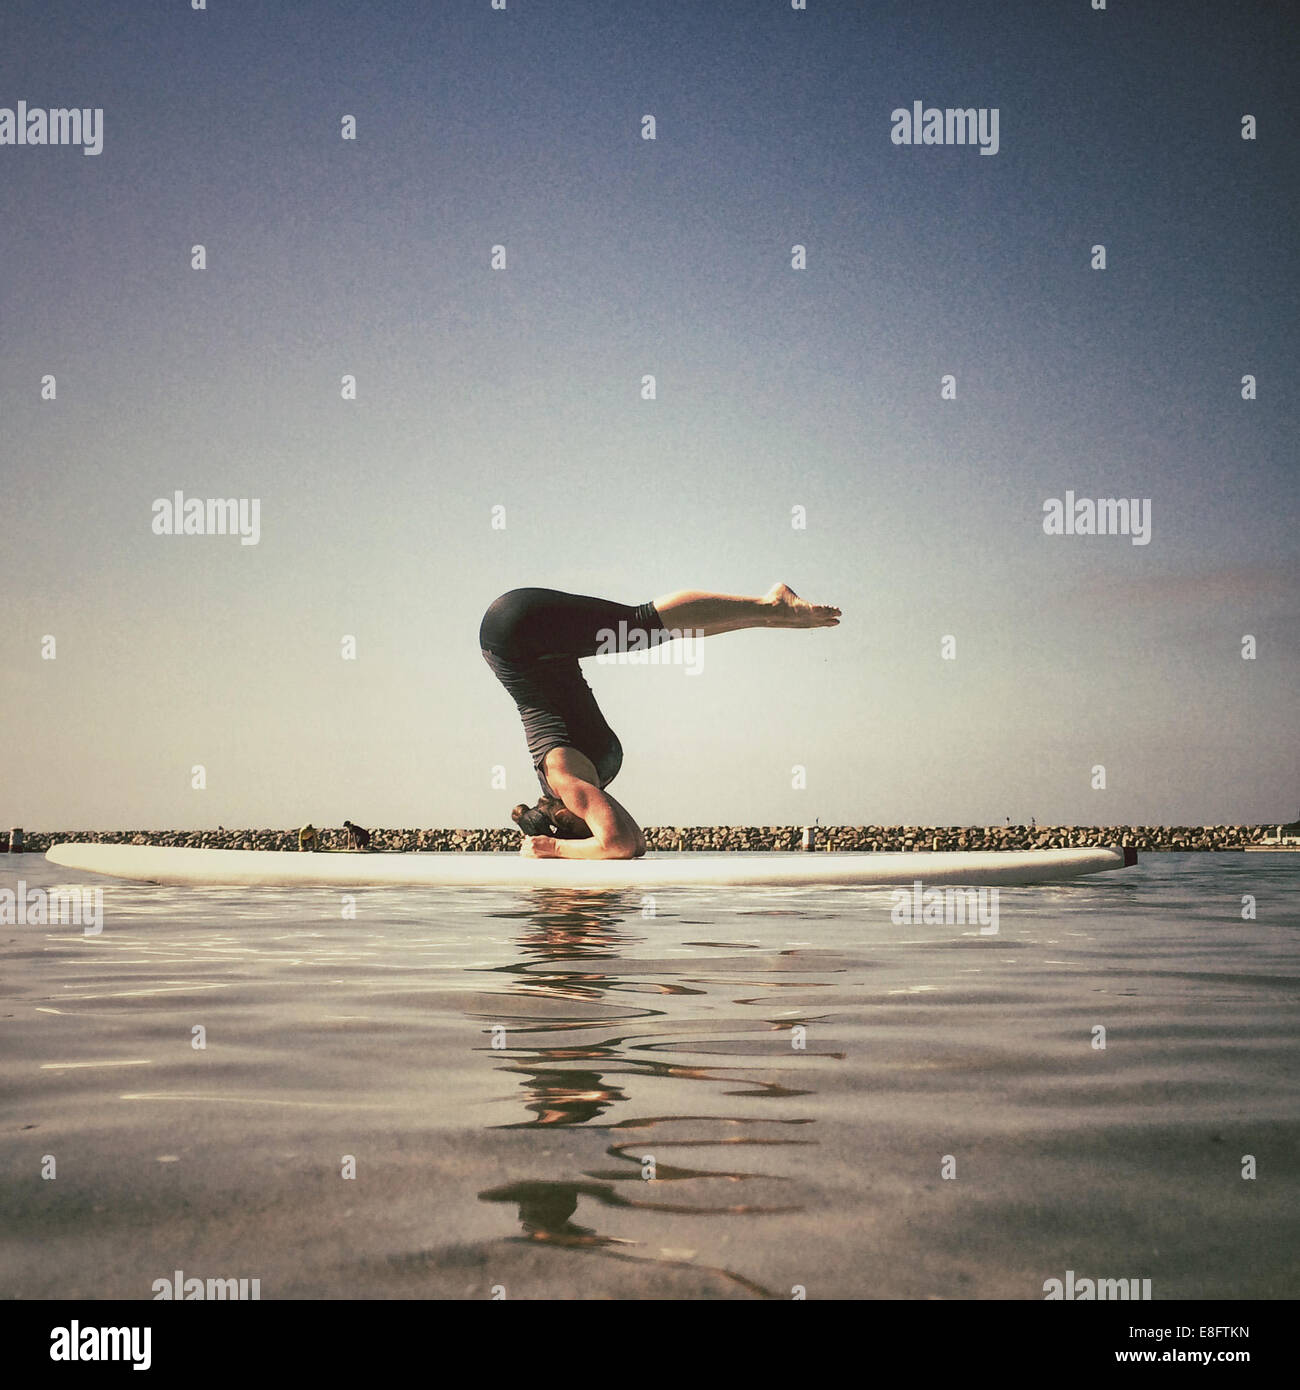 Woman doing a supported yoga headstand on a paddleboard, california, america, USA Stock Photo